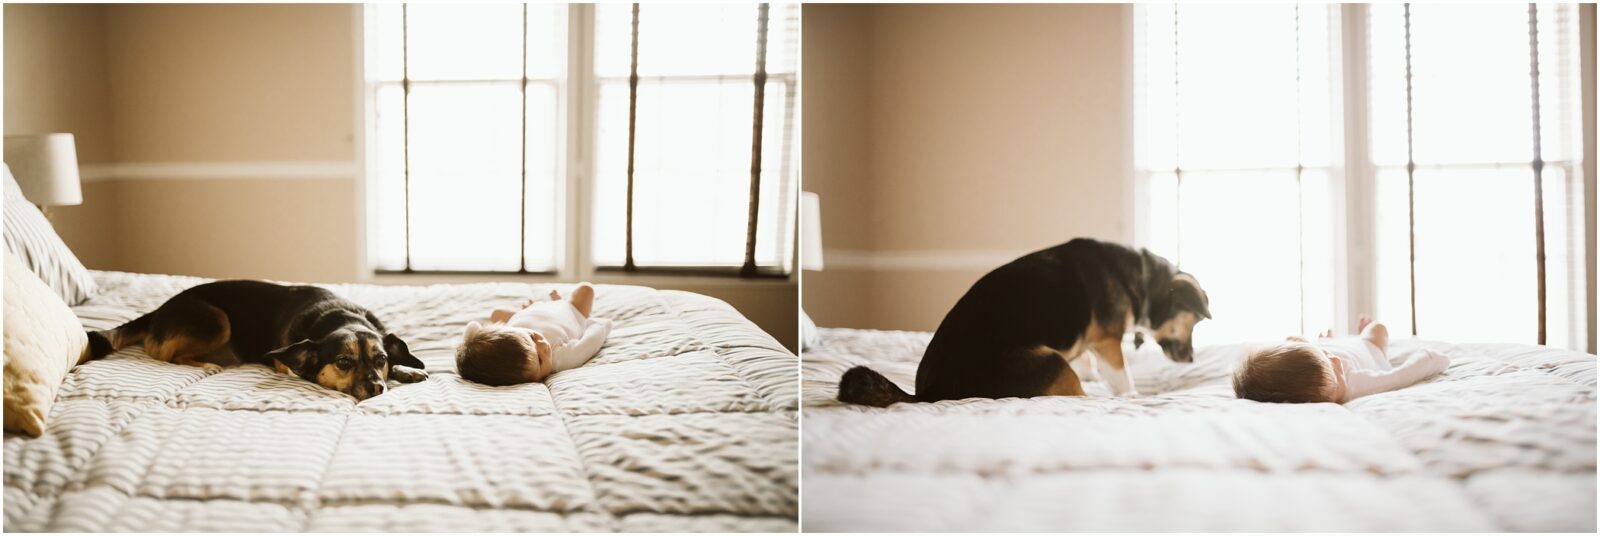 Newborn Lifestyle photos of a newborn baby girl with her dog on a bed. Photograph by Laura Mares Photography, Pittsburgh Newborn Lifestyle Photographer